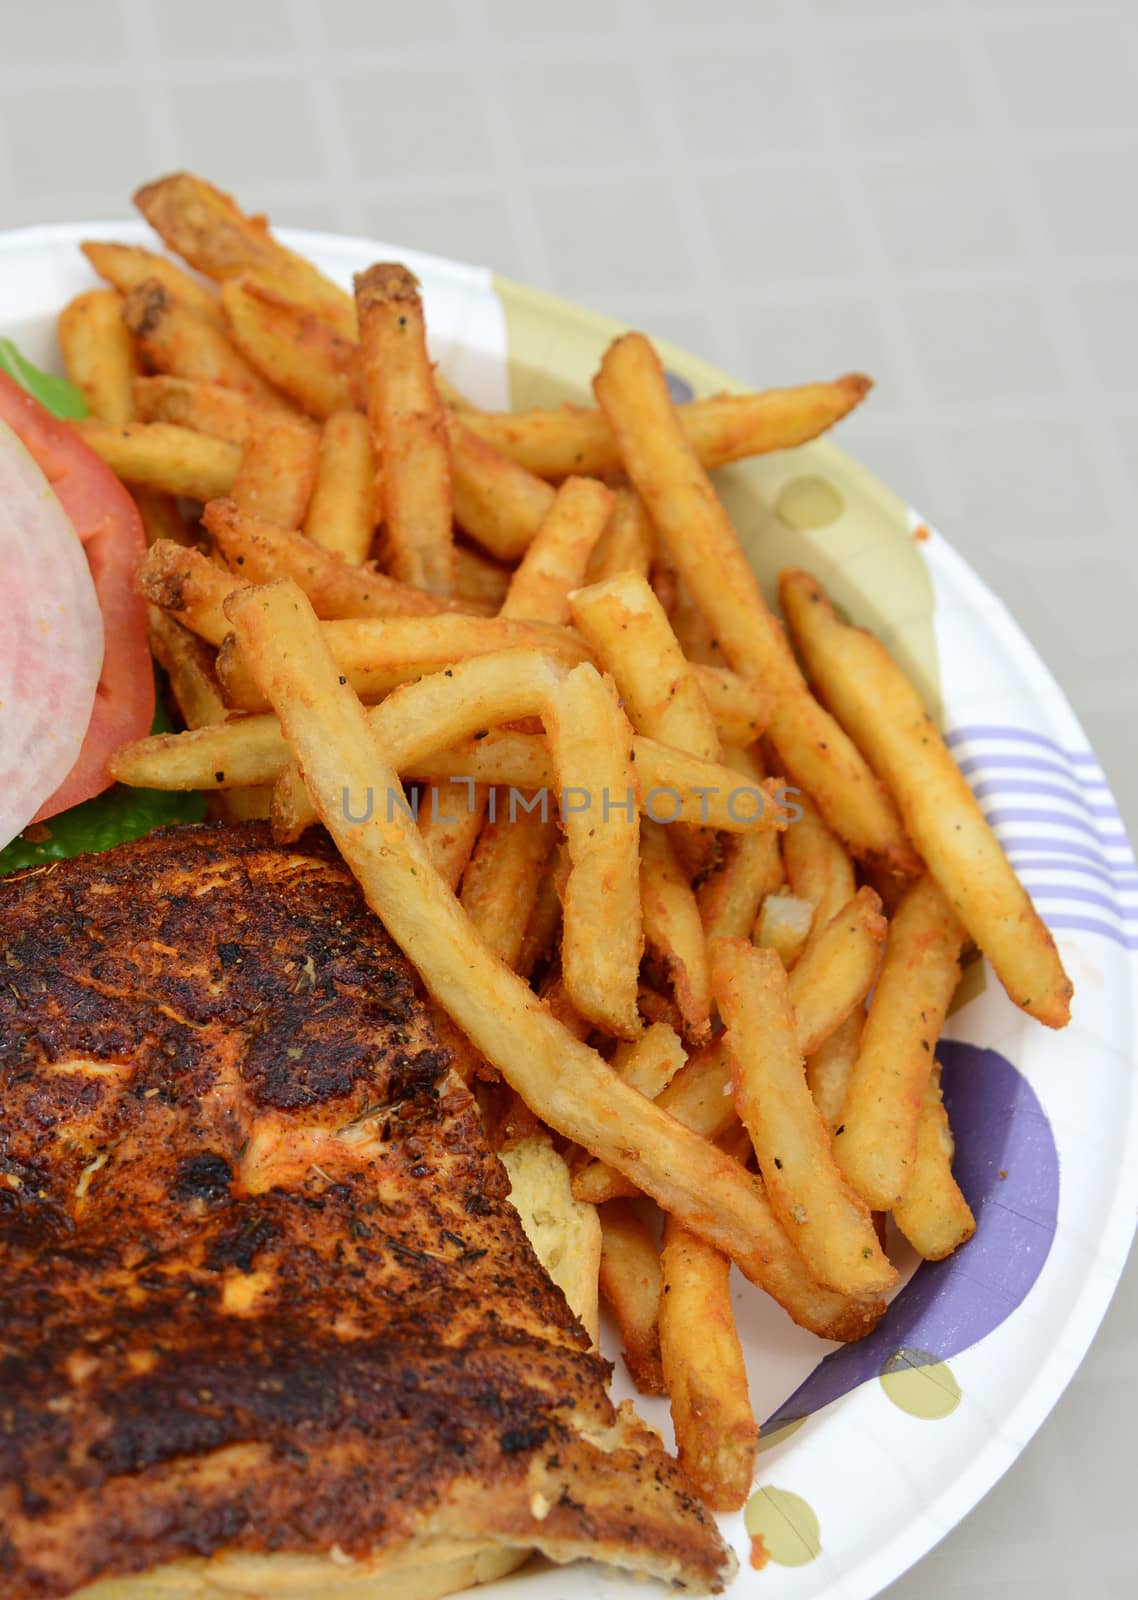 blackened fish sandwich and french fries on a plate for a picnic